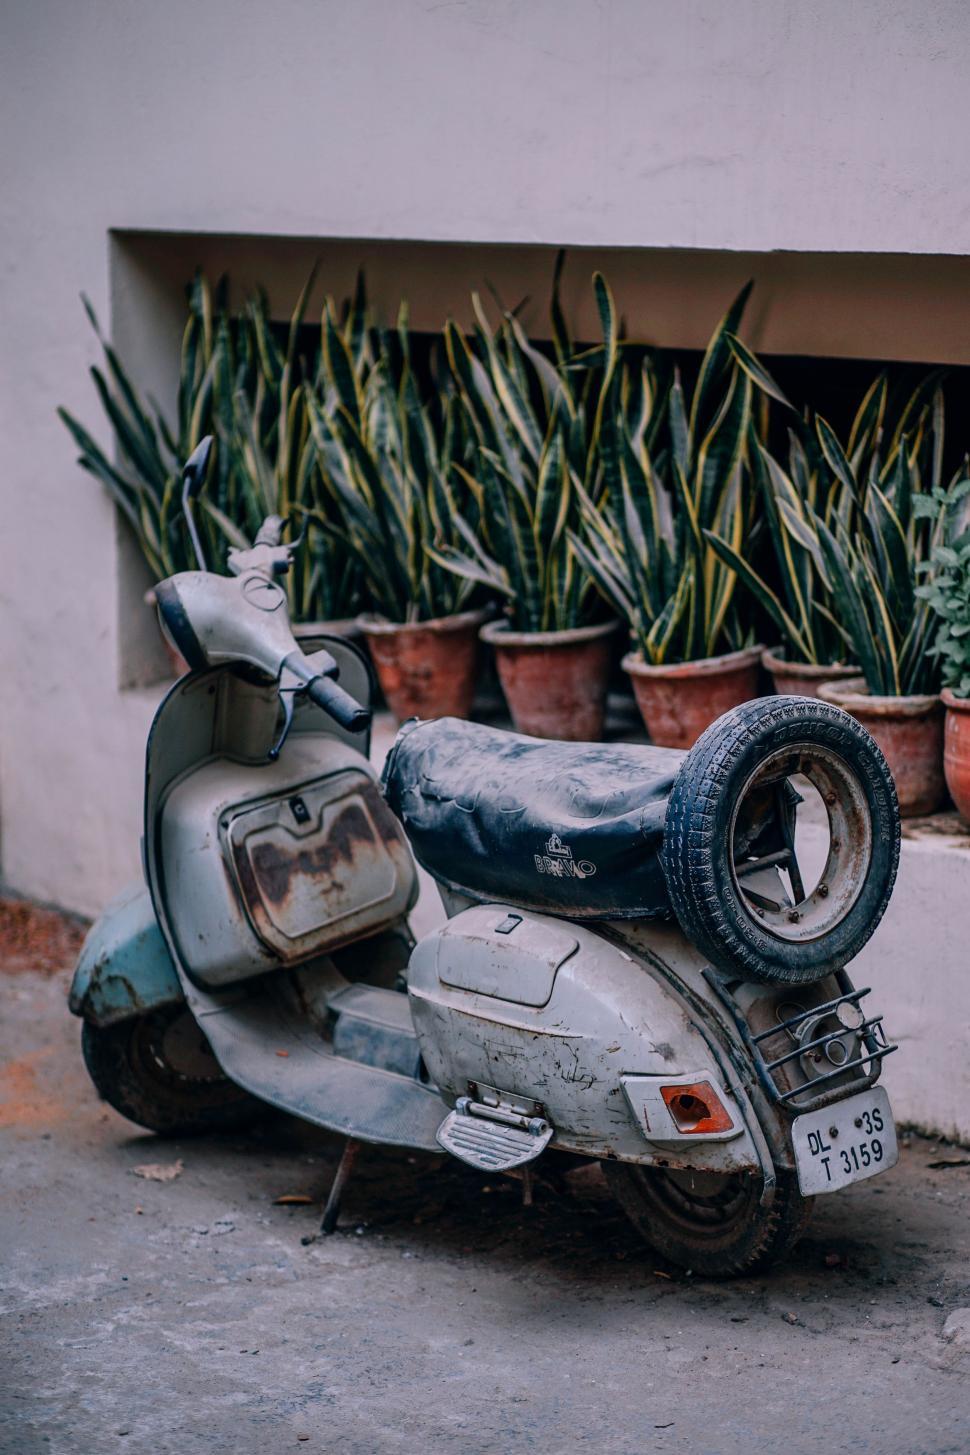 Free Image of Motor Scooter Parked in Front of a House 